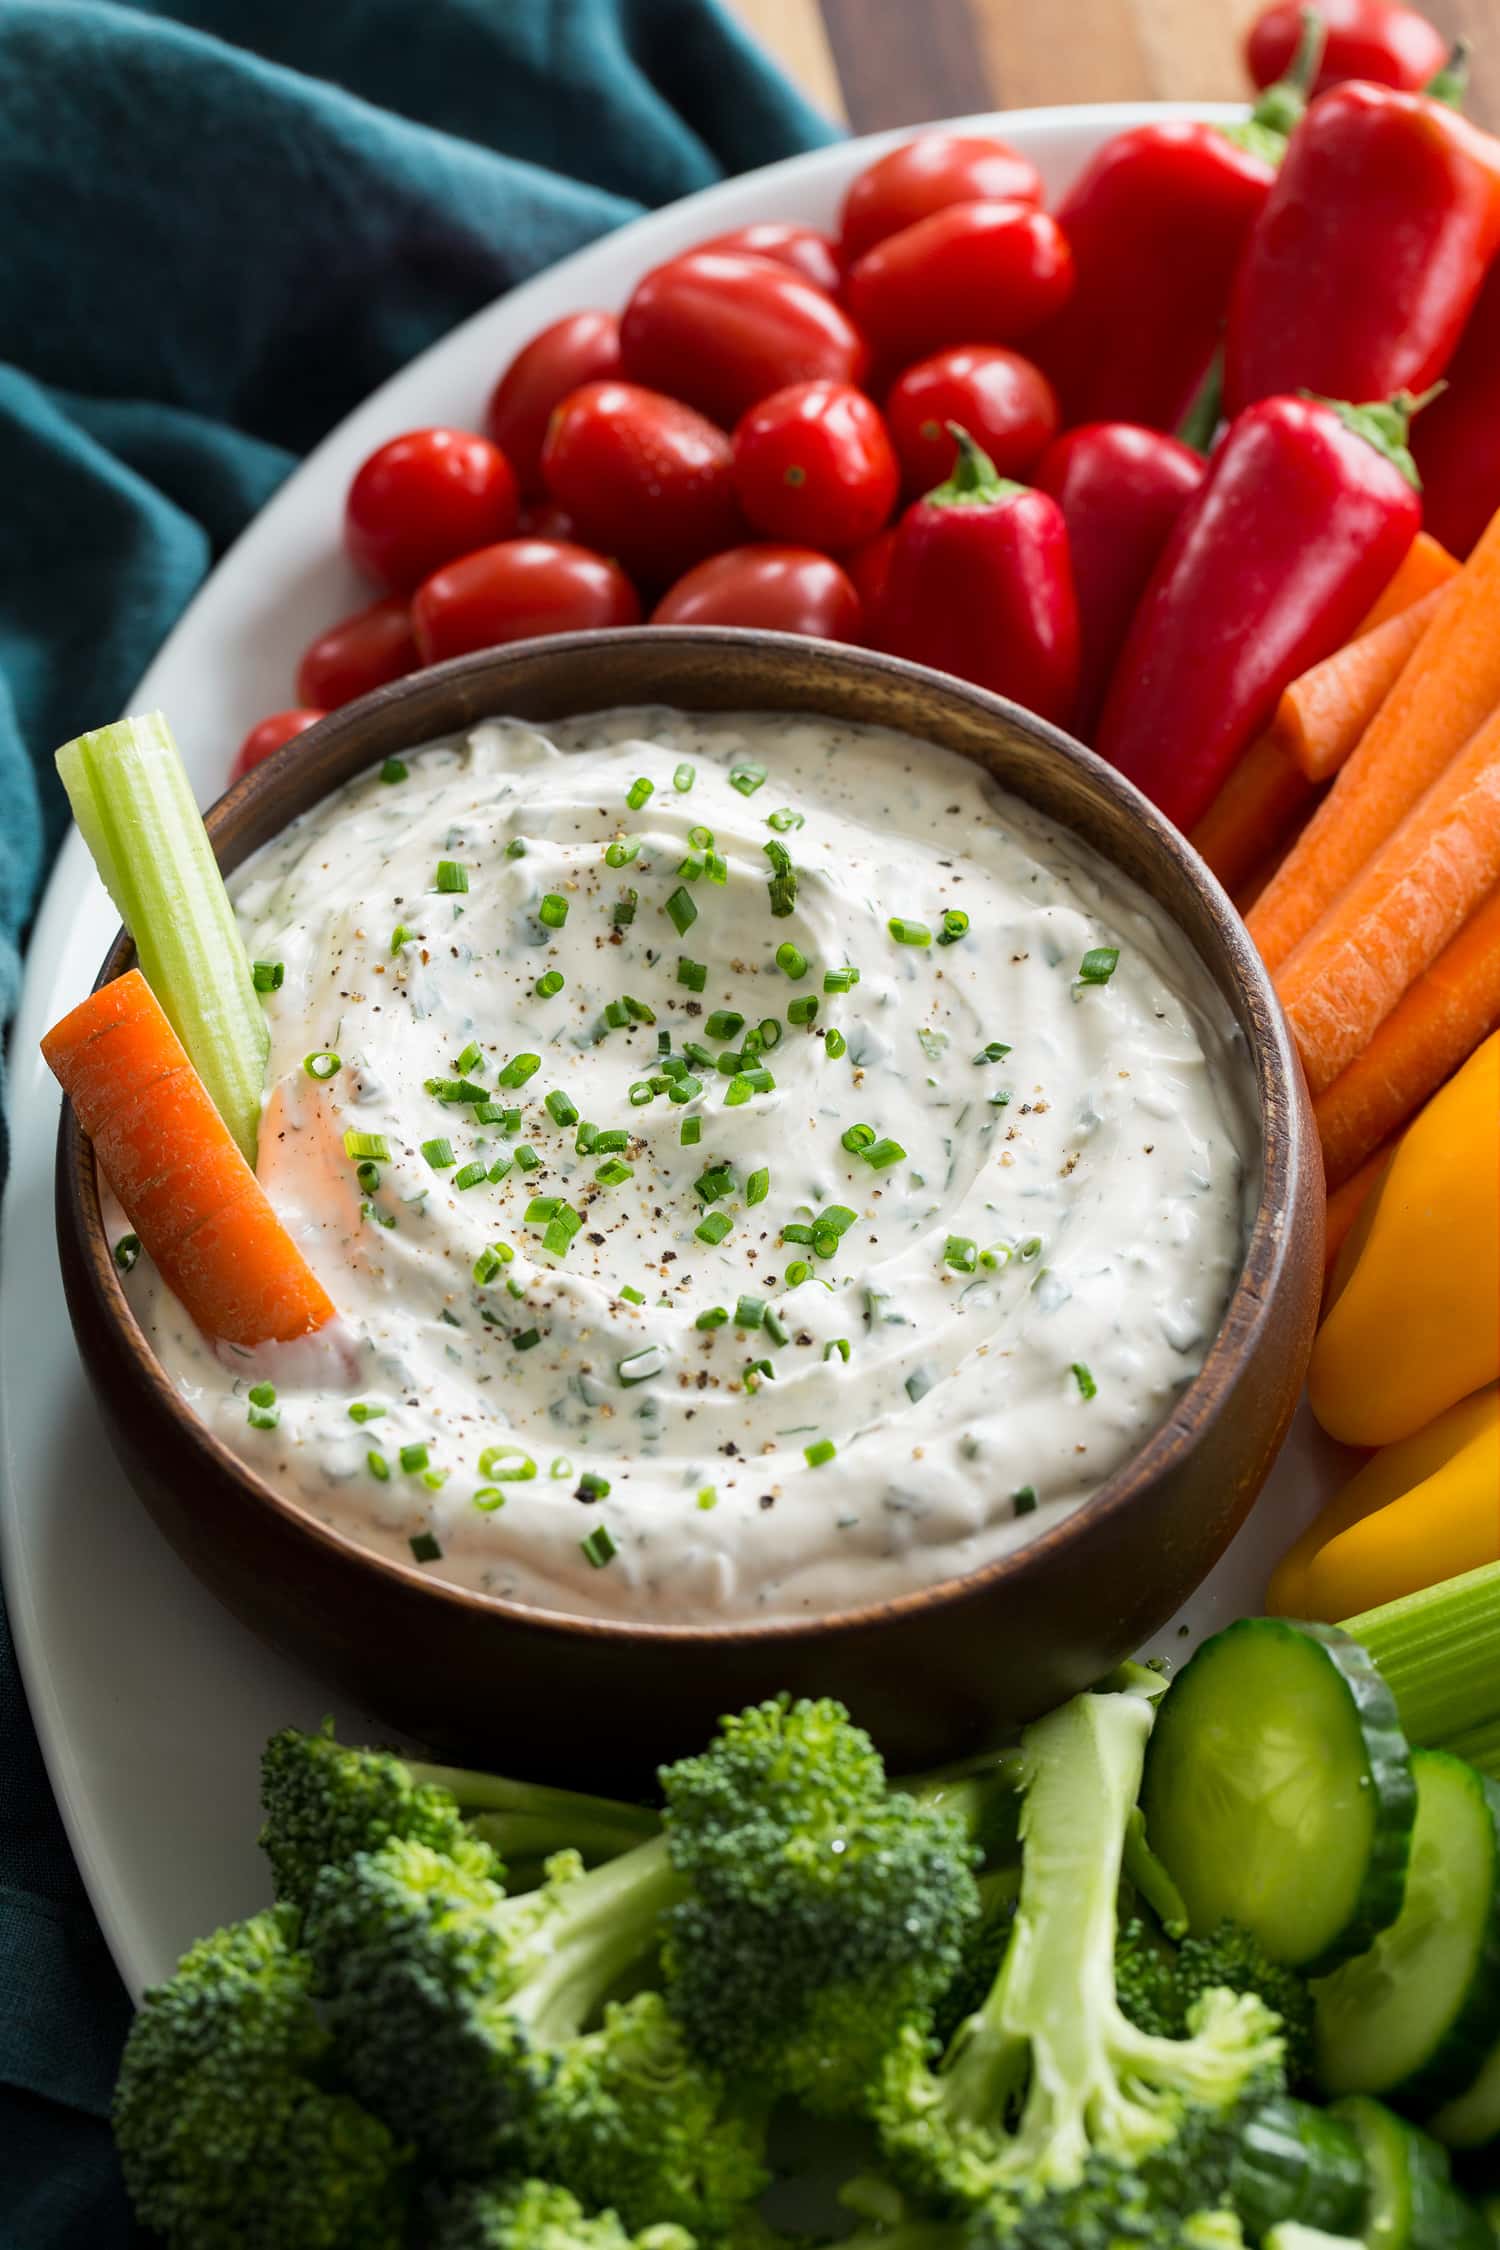 Close up photo of ranch dip in a wooden bowl.